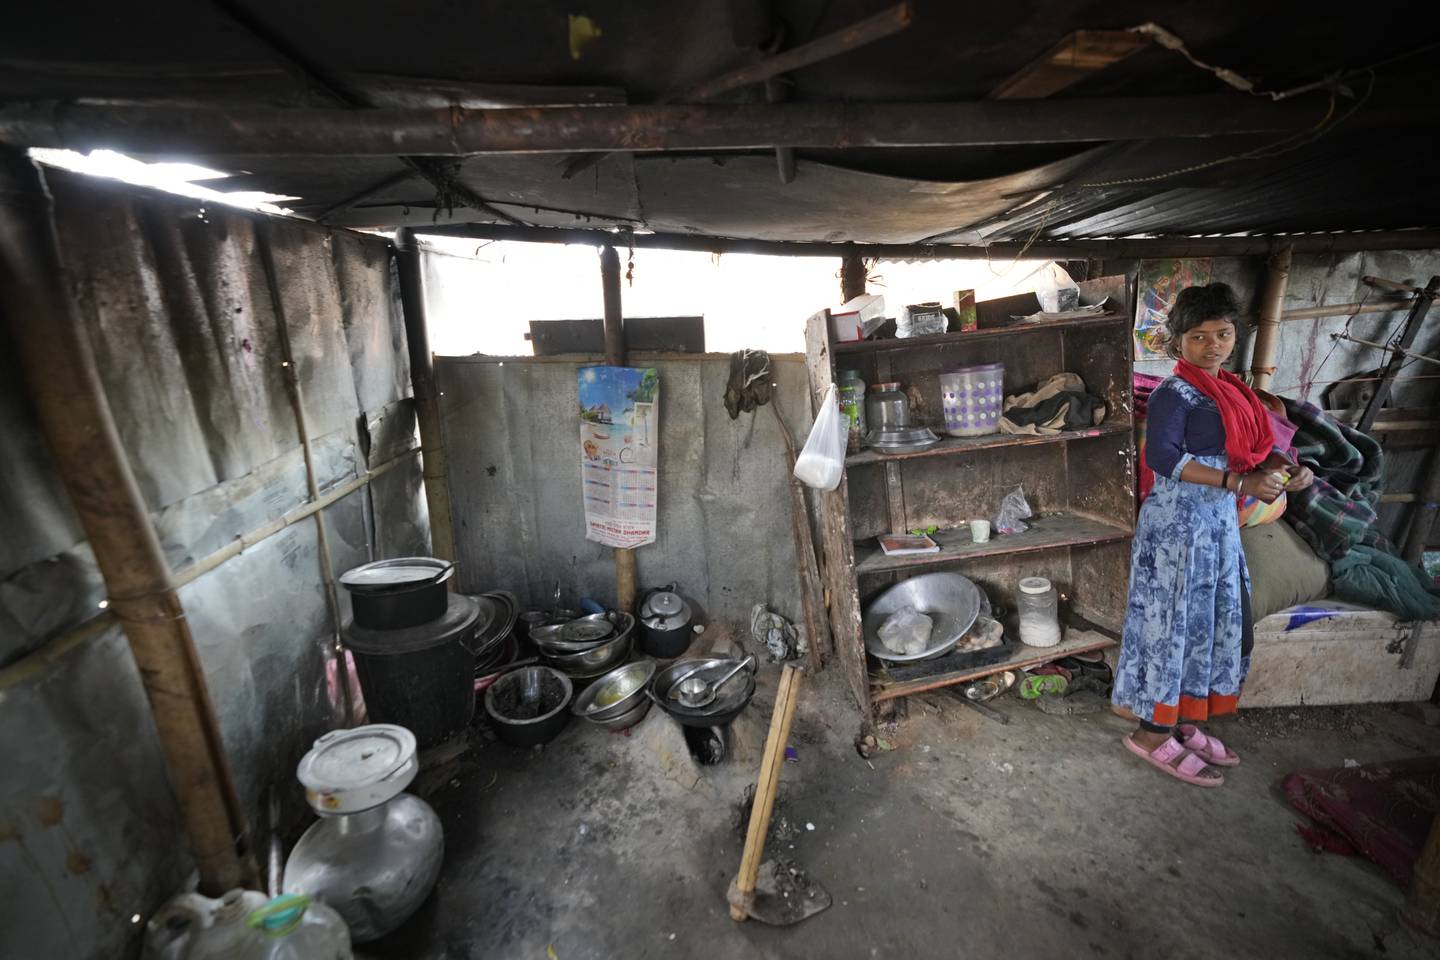 A girl stands in her shanty home on the outskirts of in Guwahati, India, Friday, Feb. 10, 2023. In India, the legal marriageable age is 21 for men and 18 for women. Poverty, lack of education, and social norms and practices, particularly in rural areas, are considered reasons for child marriages across the country. UNICEF estimates that at least 1.5 million girls under 18 get married in India every year, making it home to the largest number of child brides in the world, accounting for a third of the global total. (AP Photo/Anupam Nath)